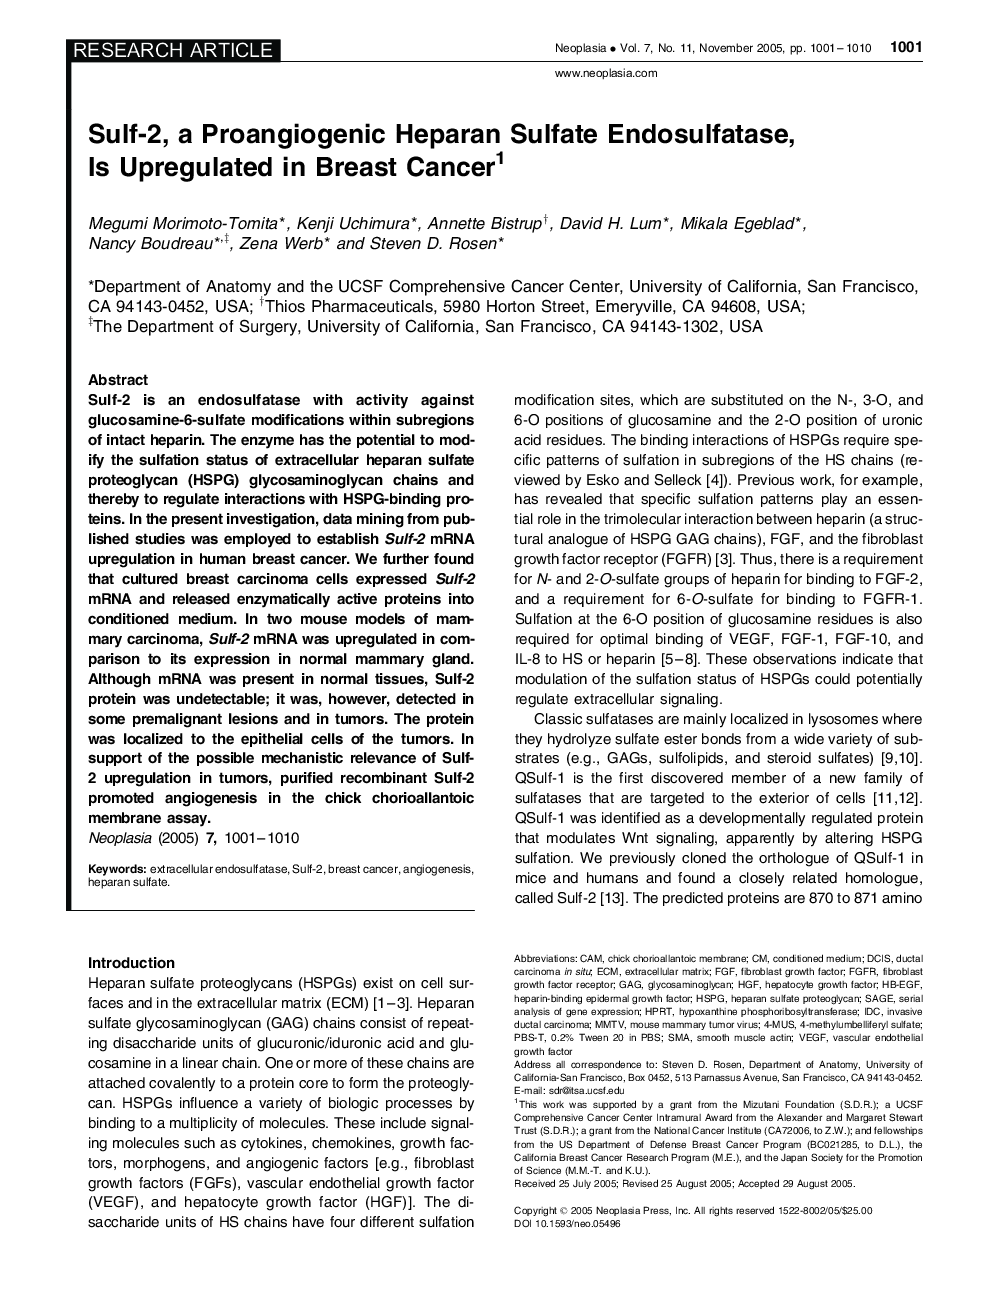 Sulf-2, a Proangiogenic Heparan Sulfate Endosulfatase, Is Upregulated in Breast Cancer